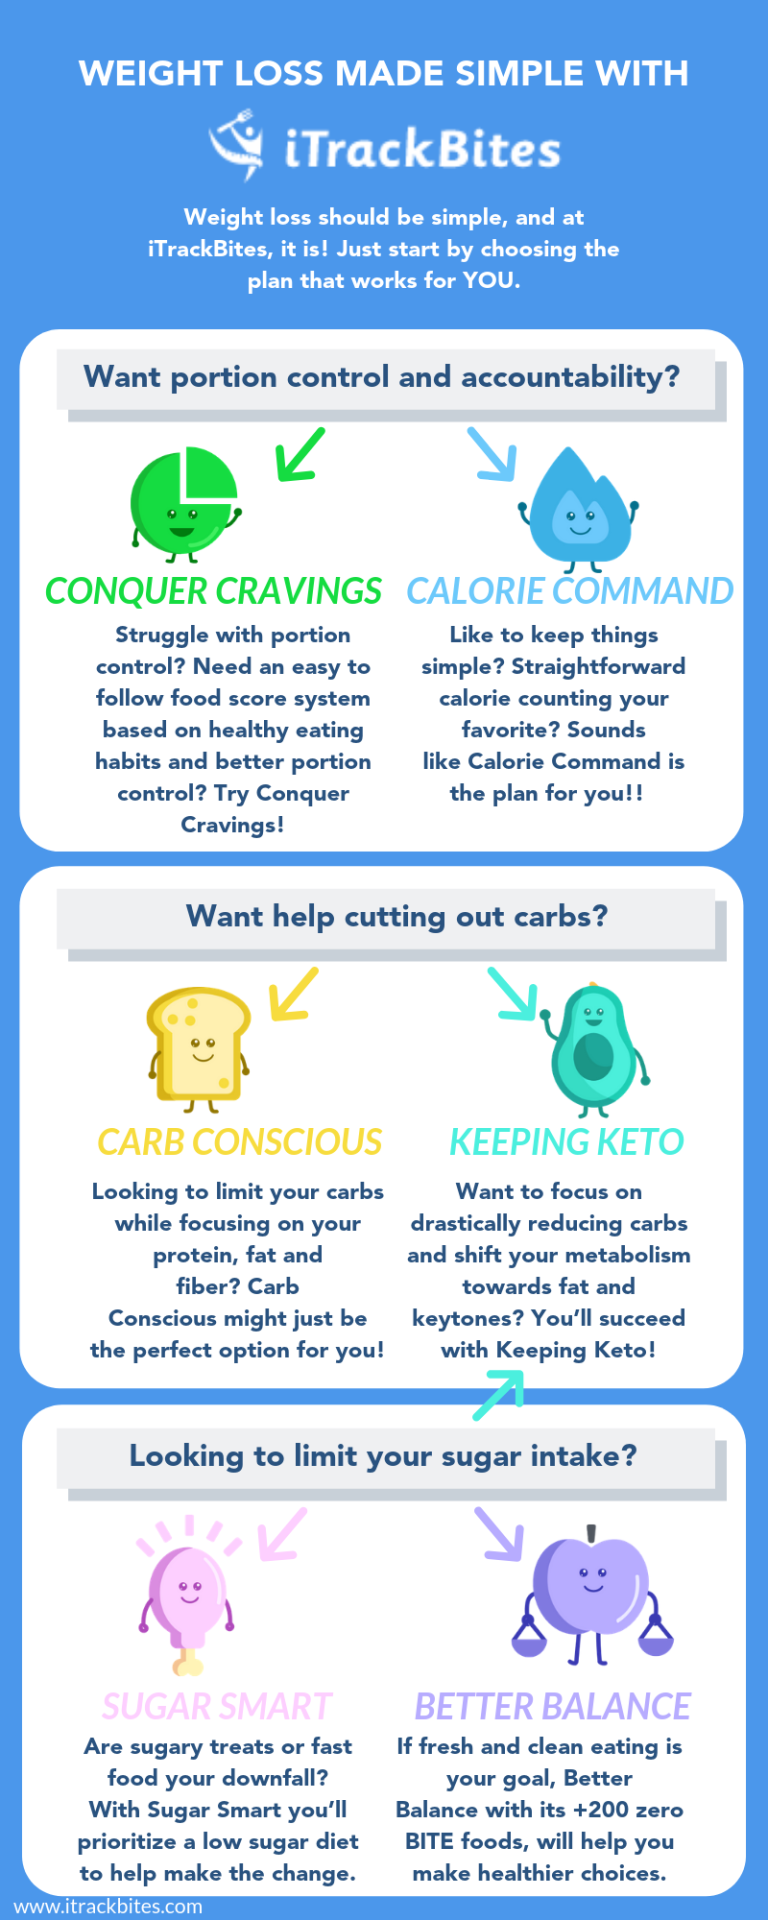 Trying to figure out which Healthi plan works best for you? Here's an infographic to make it easy! Whether your focus is on portion control, cutting back carbs, or reducing sugar, Healthi has a plan for you.</p><p>Ready to put your plan into...